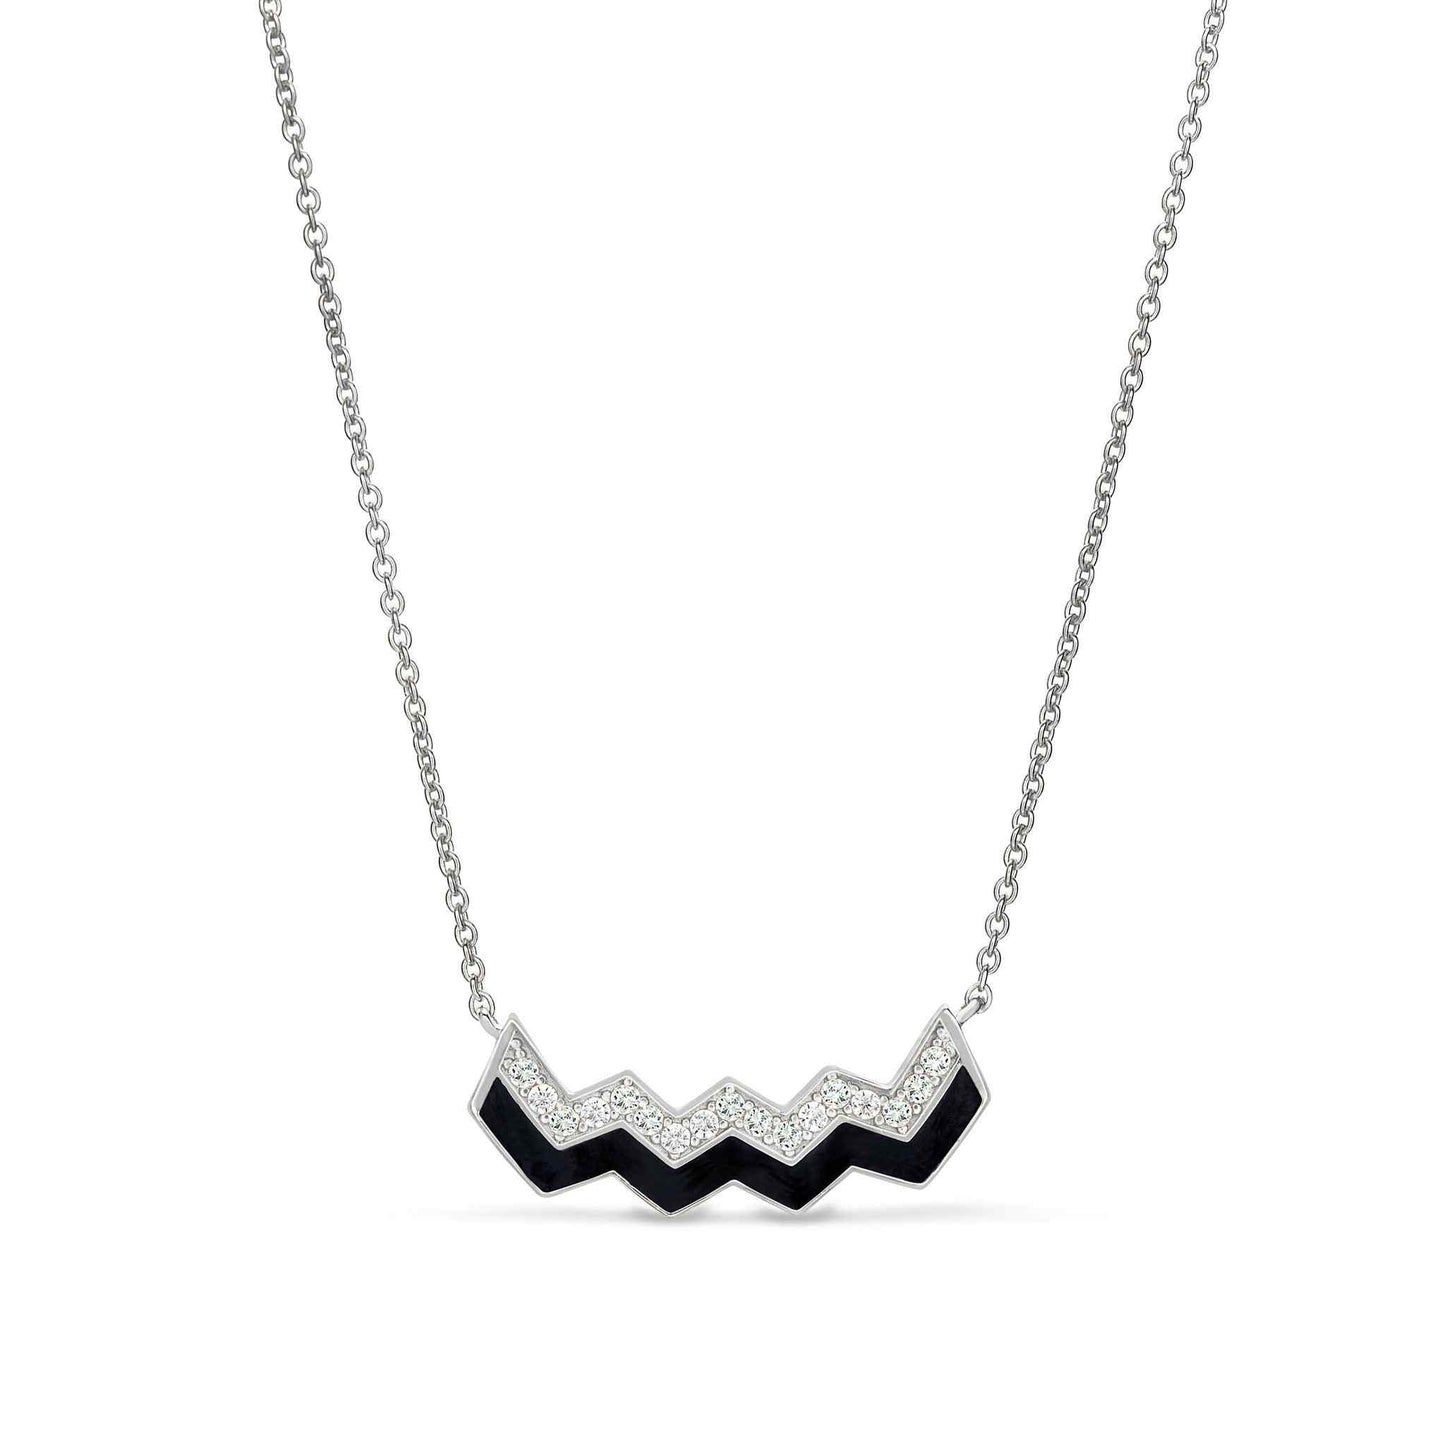 A enamel zig zag necklace with simulated diamonds displayed on a neutral white background.